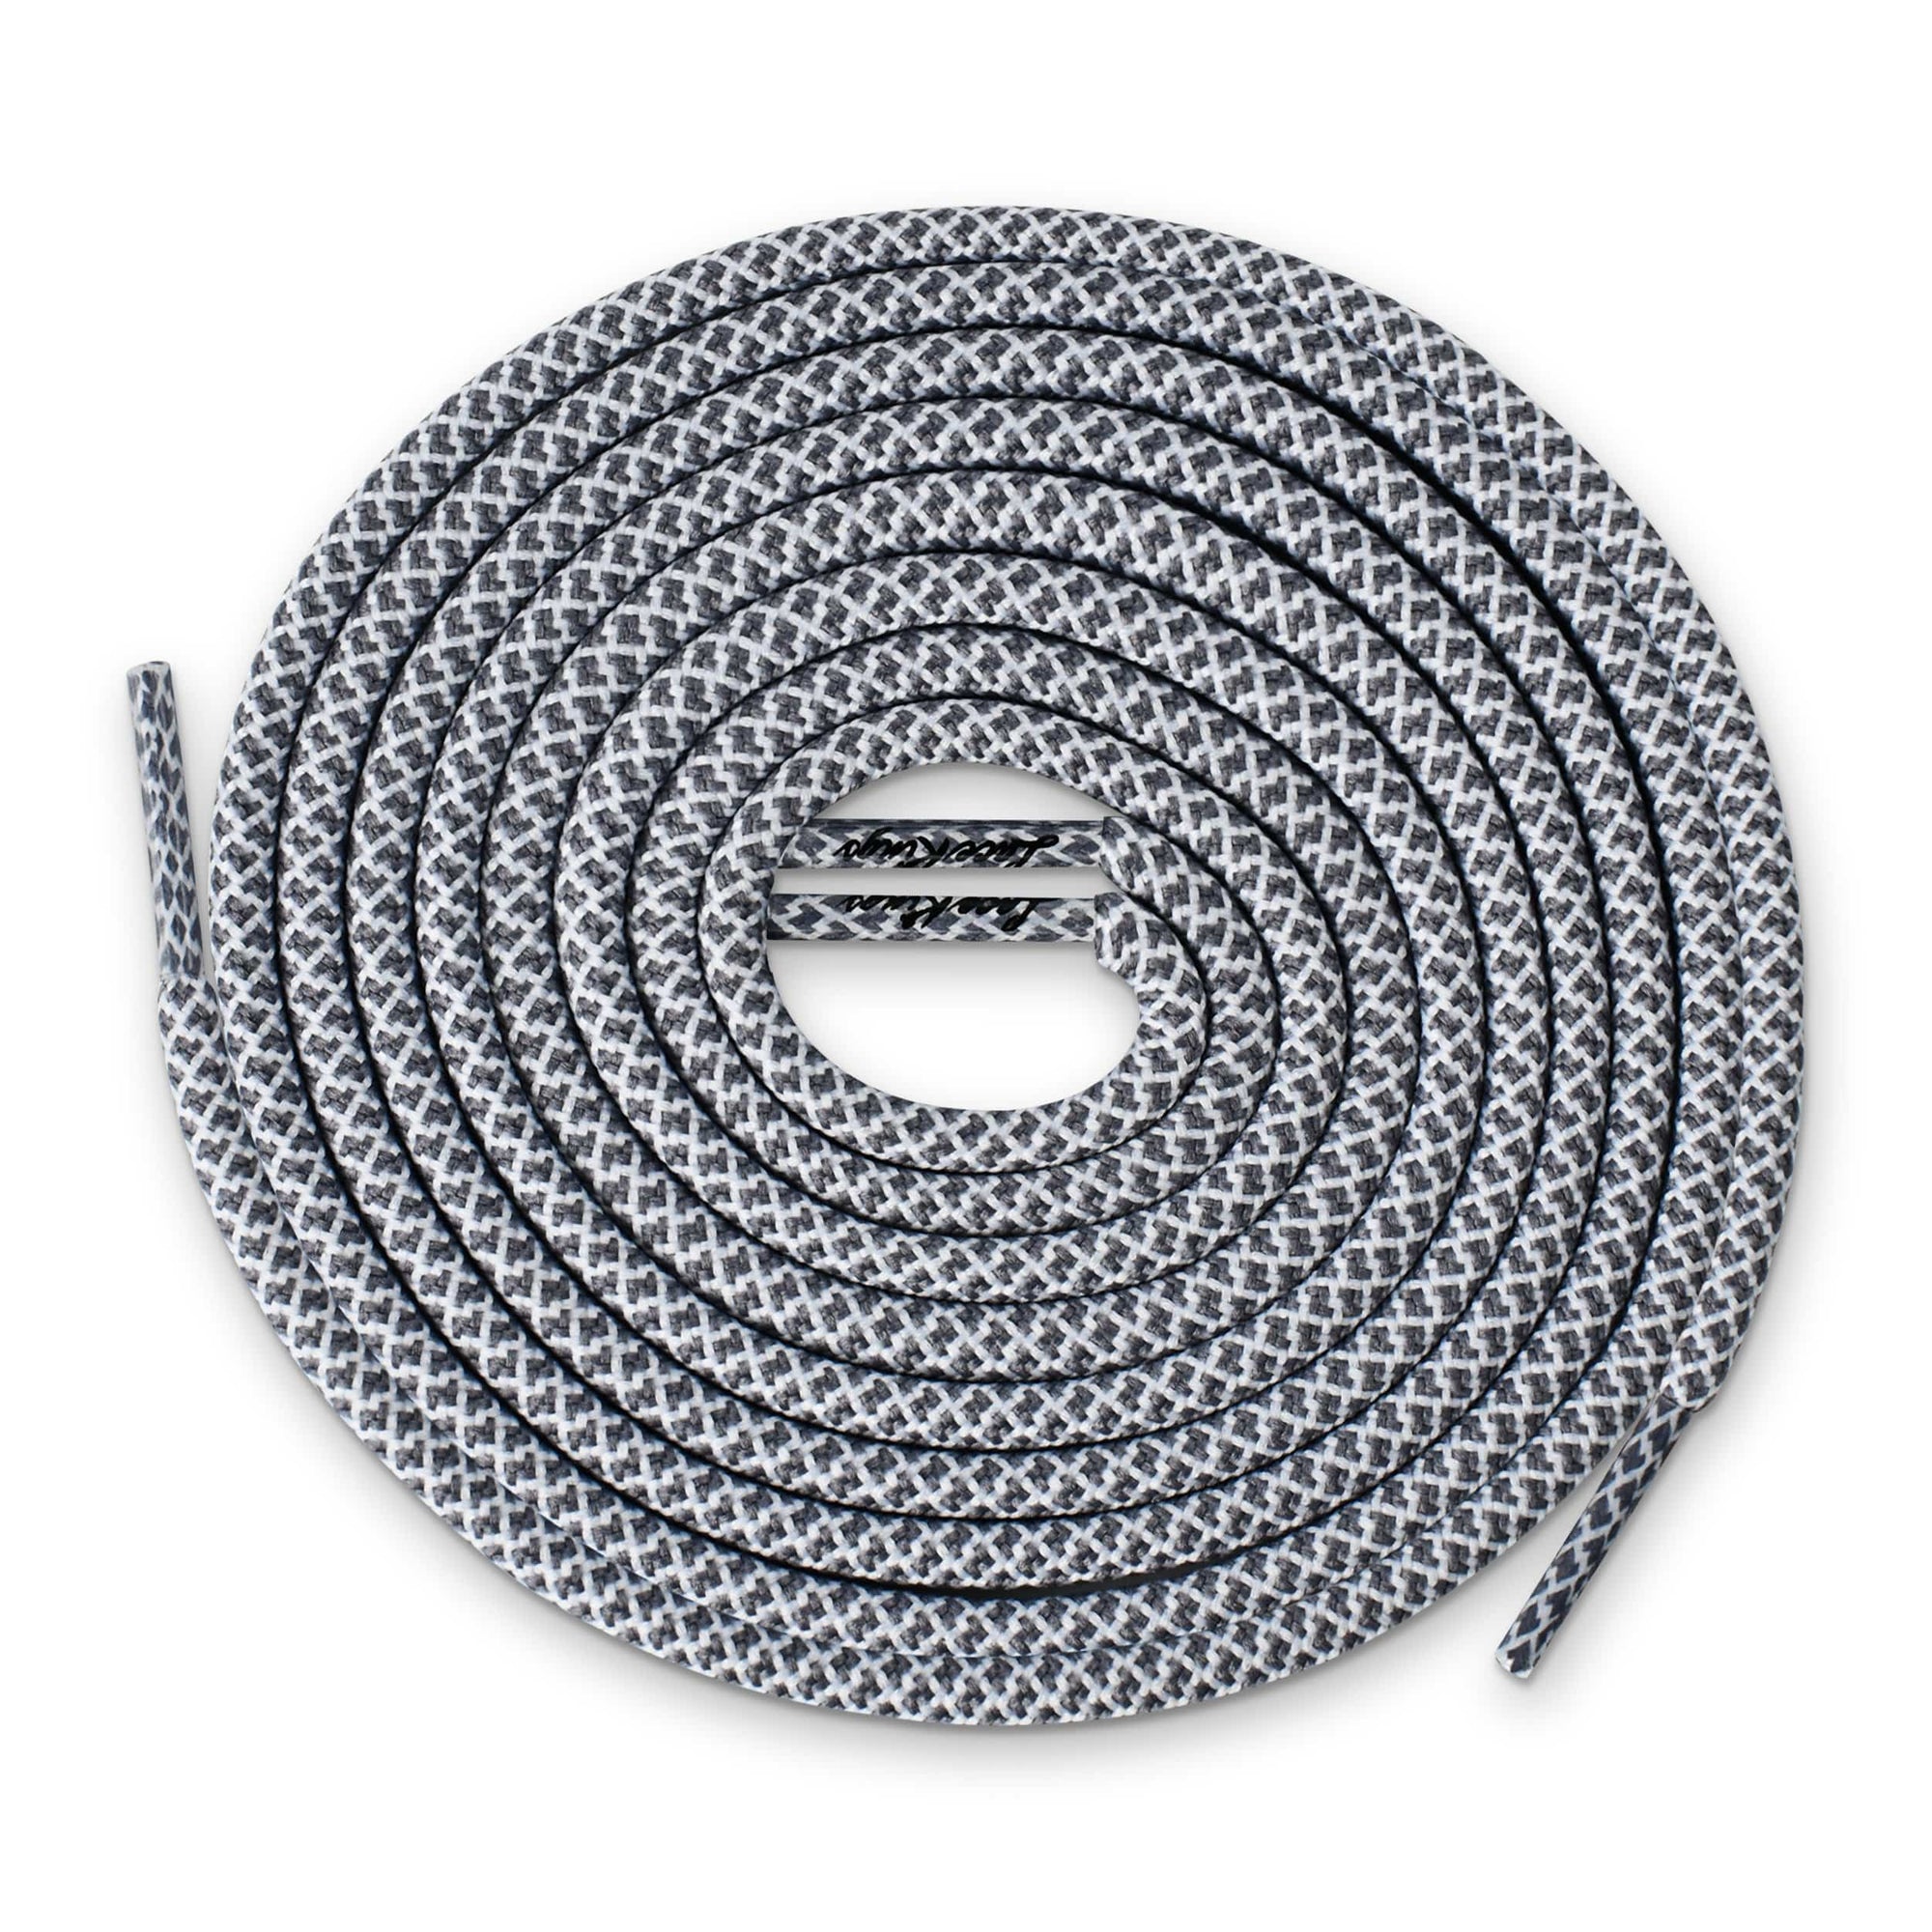 Grey/White Rope Laces – Sneaks & Laces